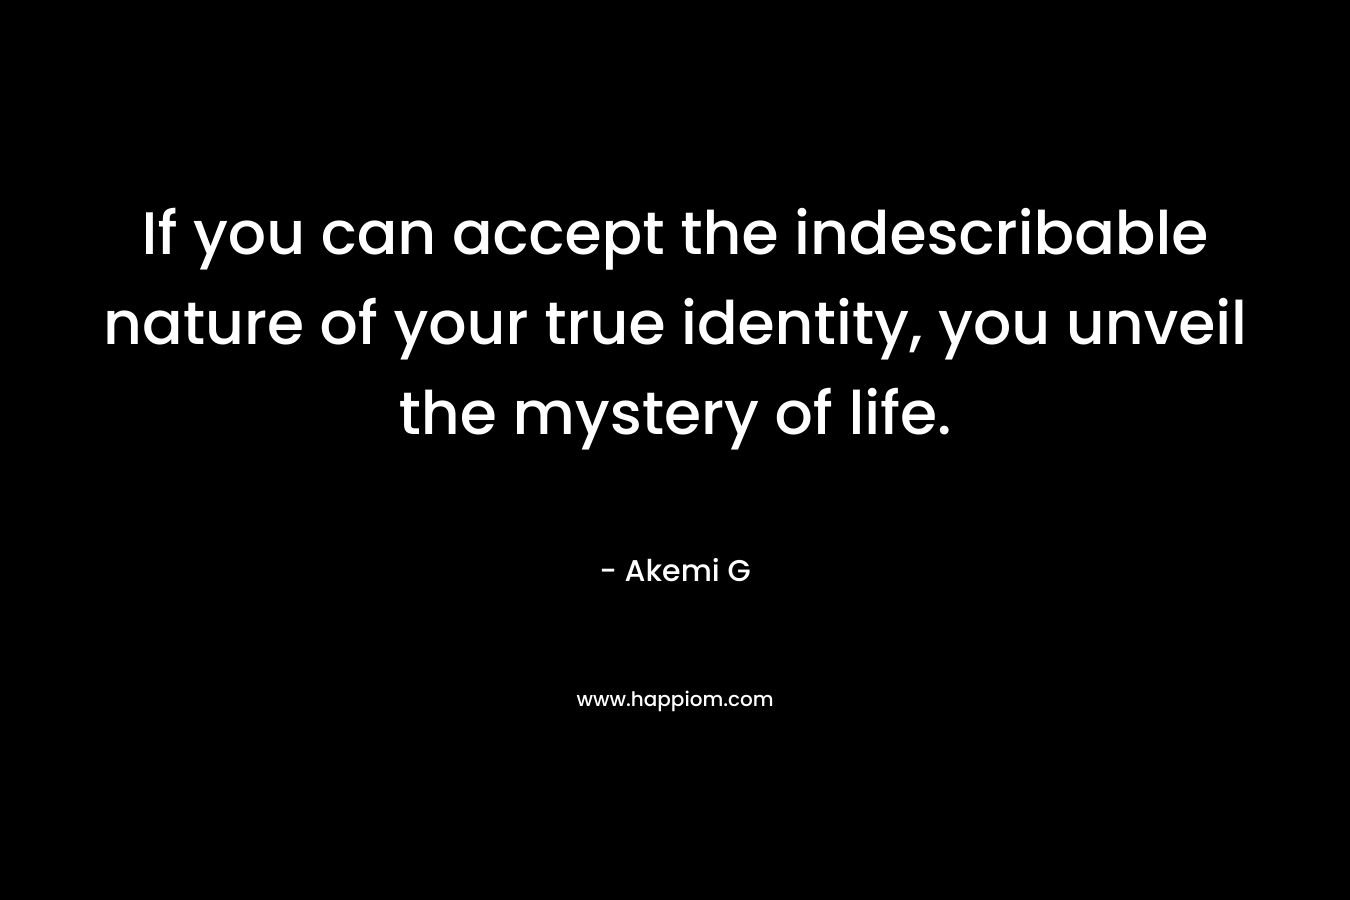 If you can accept the indescribable nature of your true identity, you unveil the mystery of life.